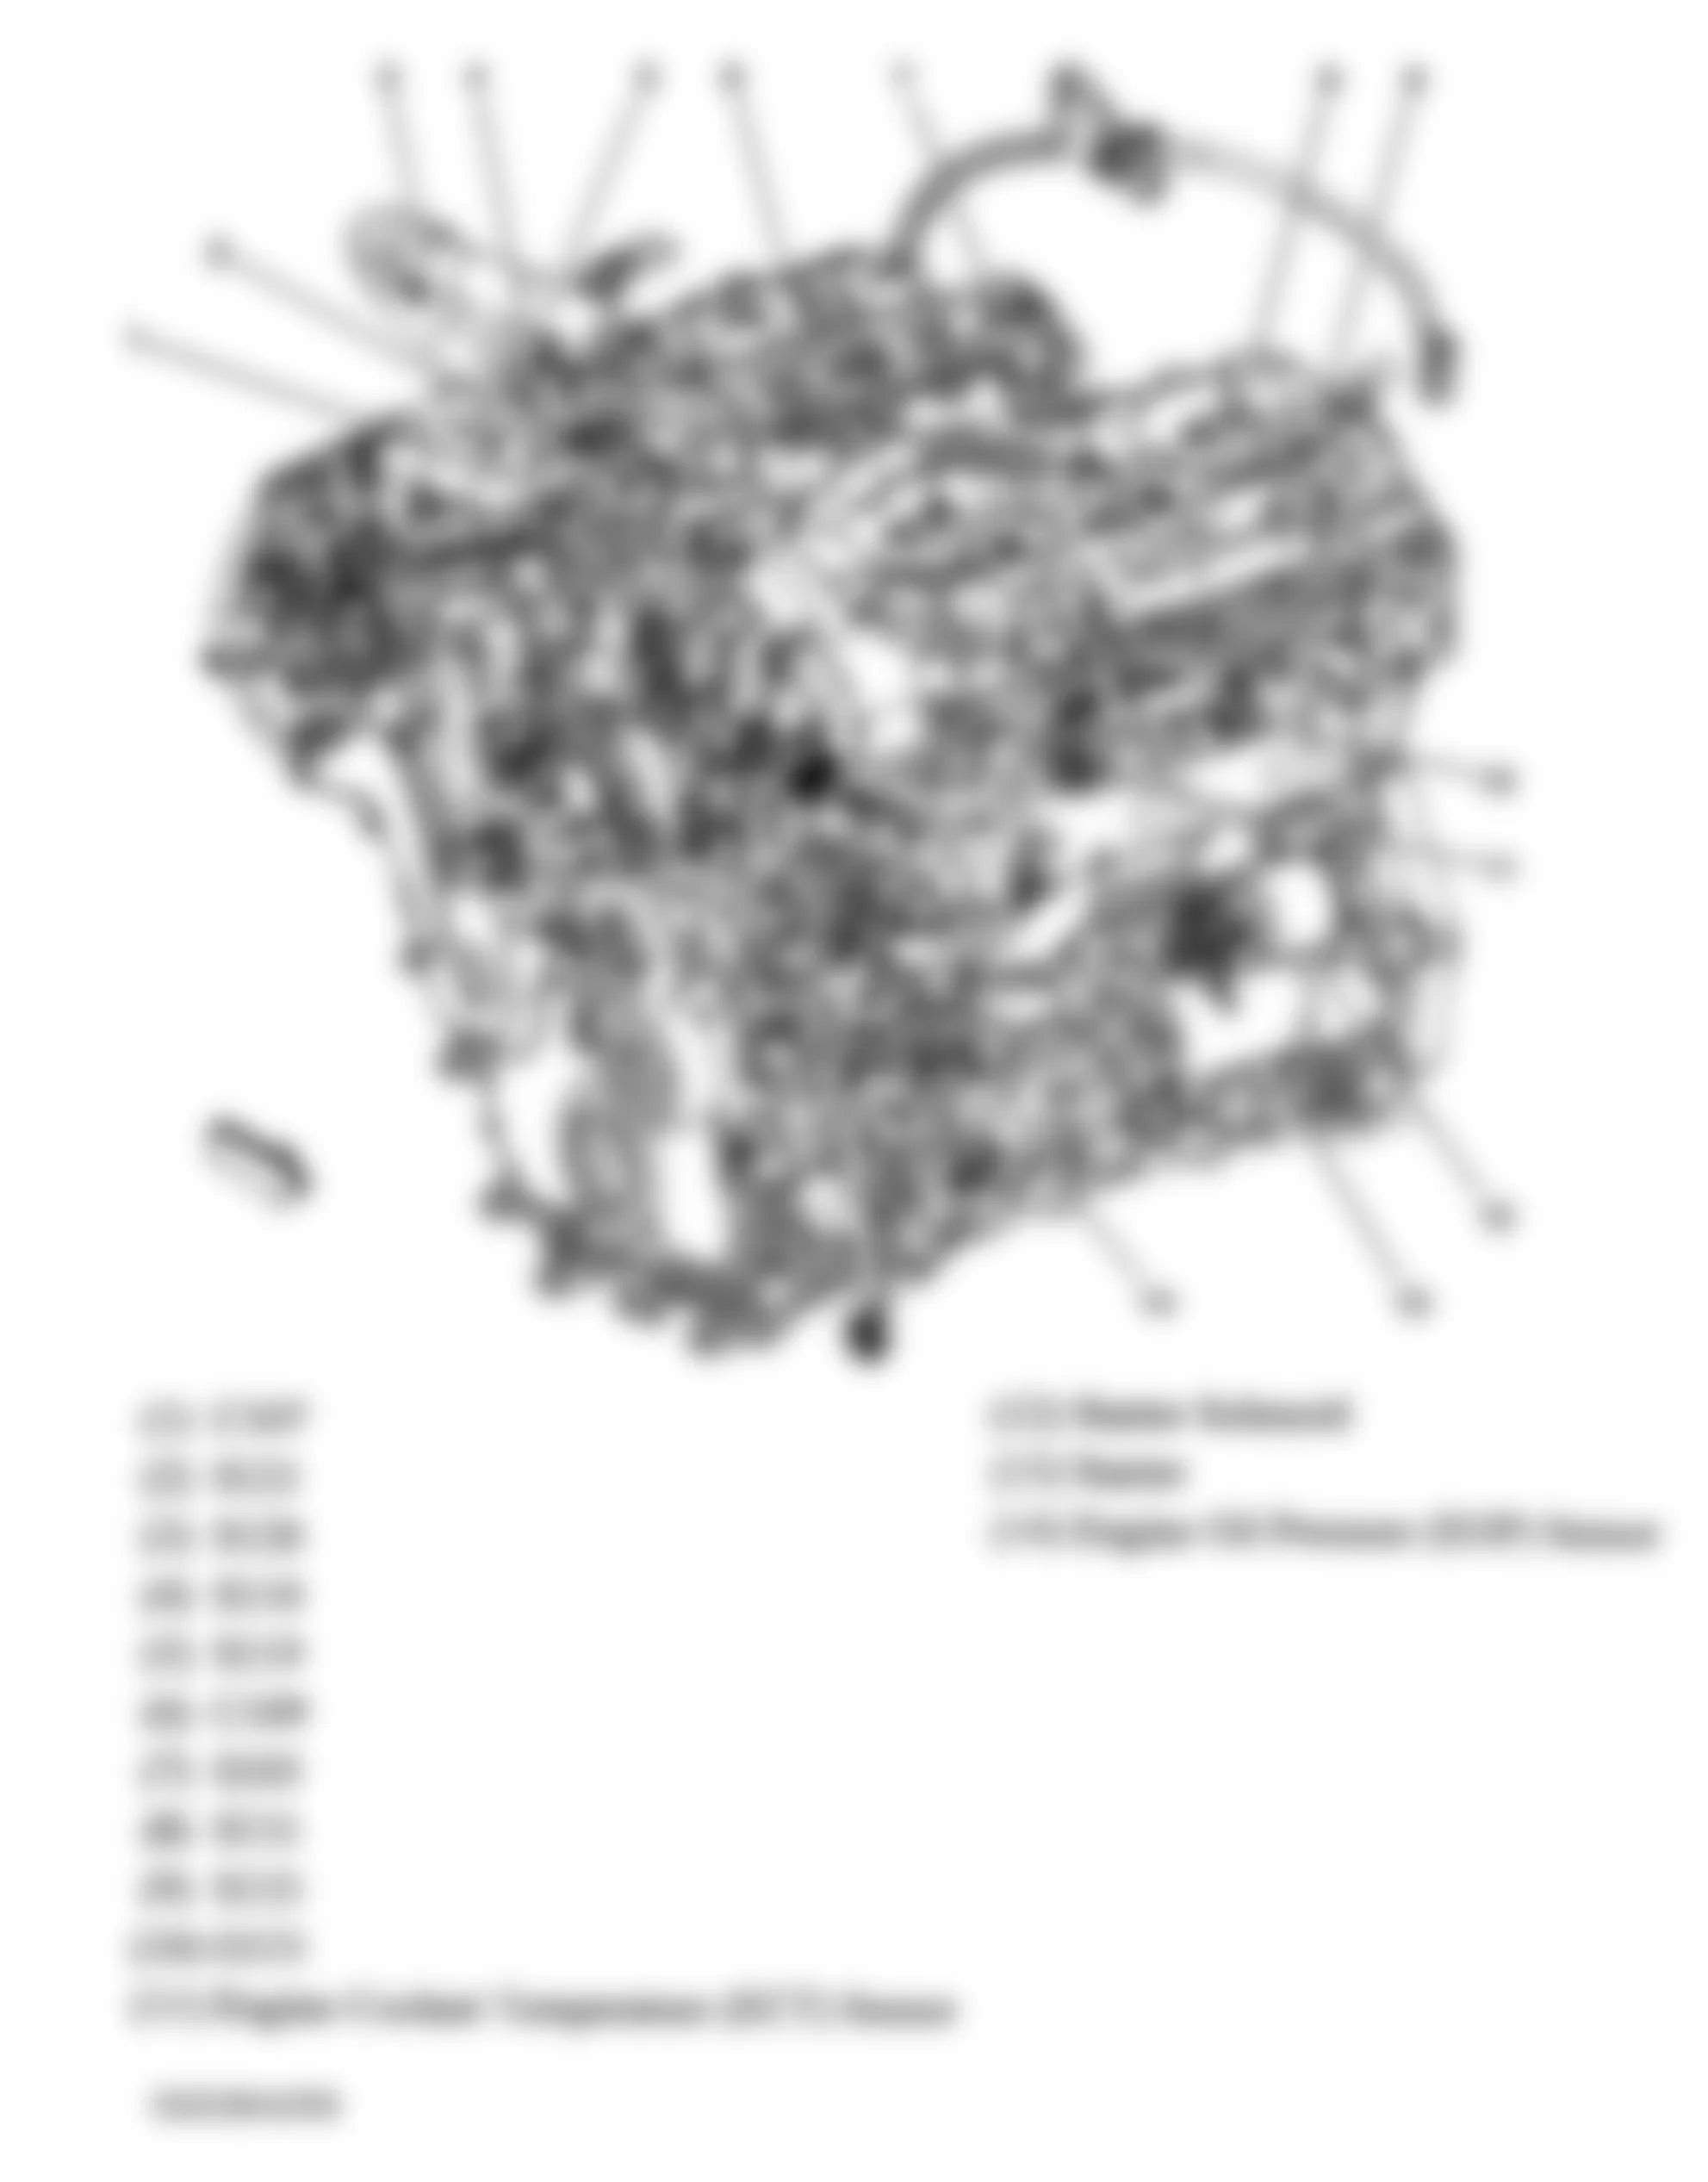 Buick LaCrosse CXS 2005 - Component Locations -  Front Of Engine (3.6L)